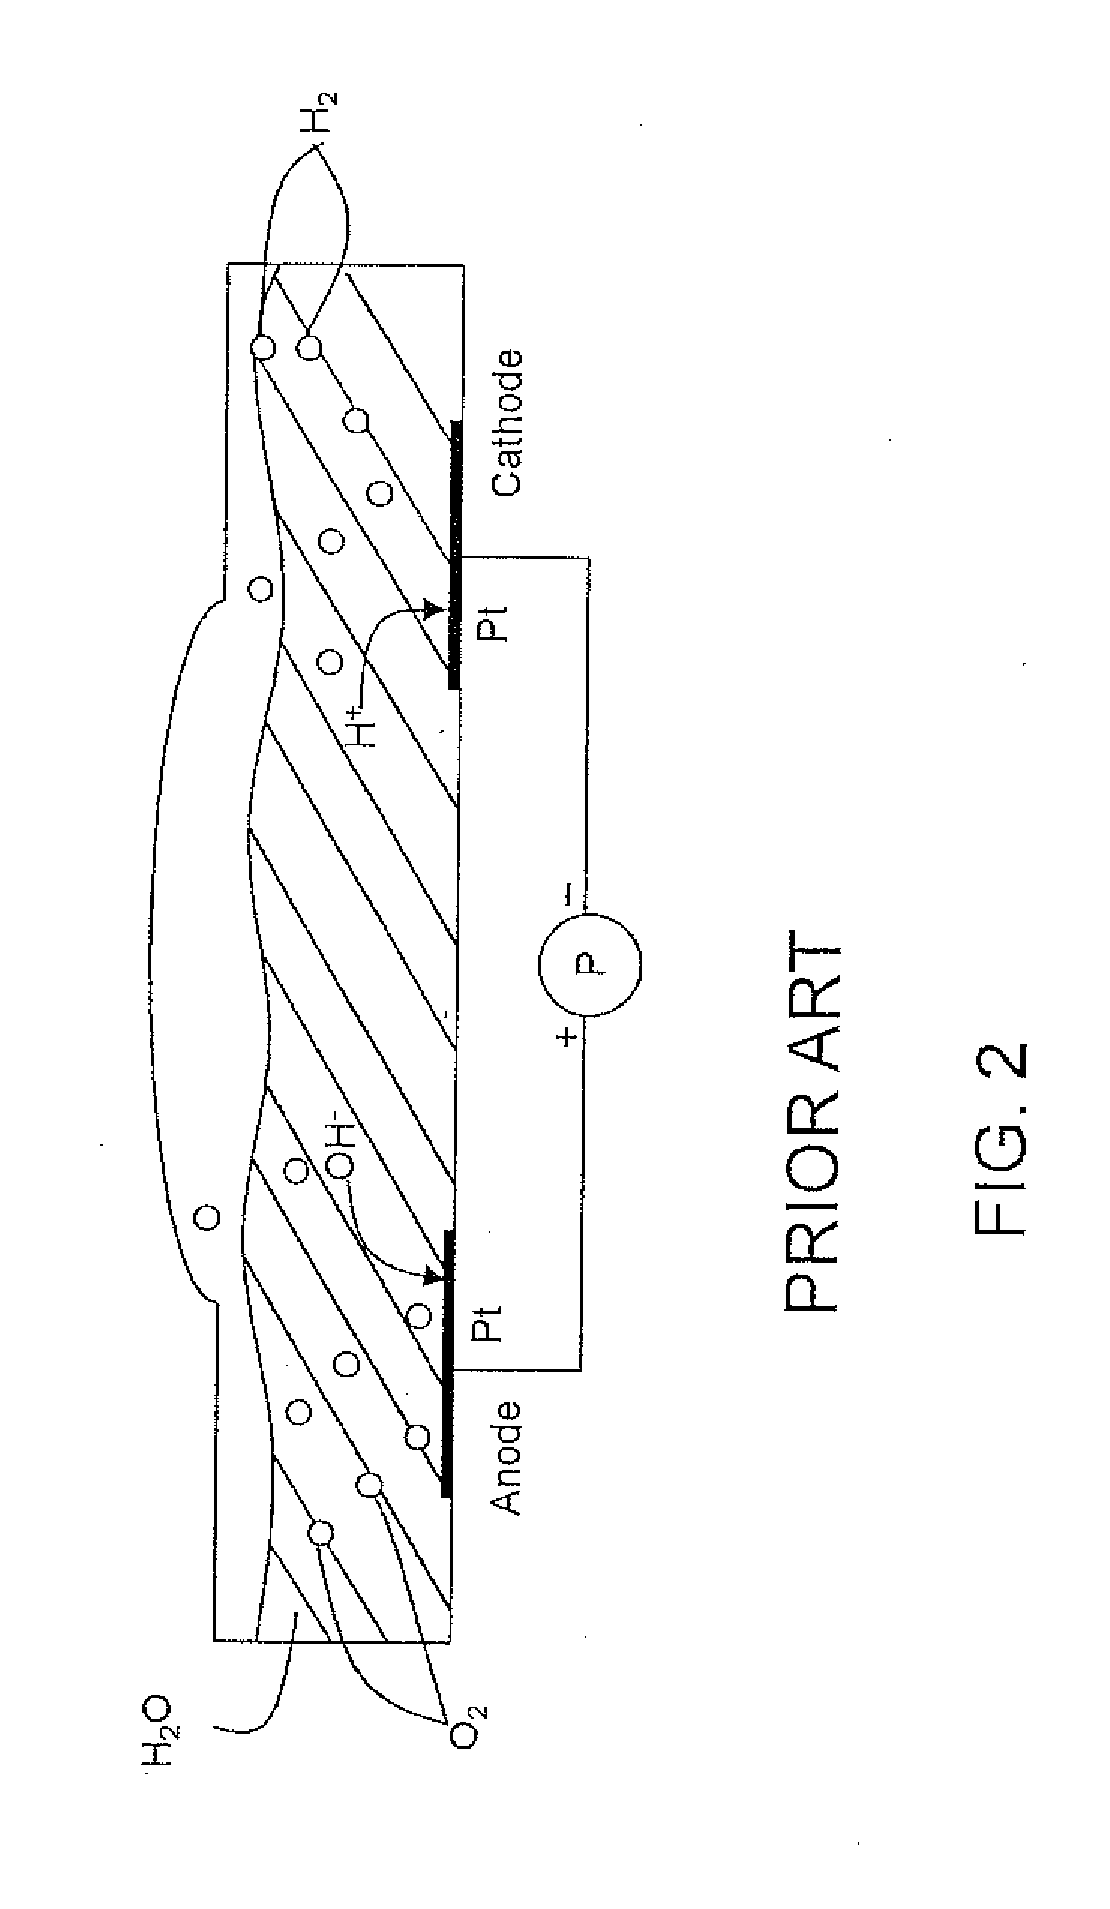 Hydrogen production from an integrated electrolysis cell and hydrocarbon gasification reactor